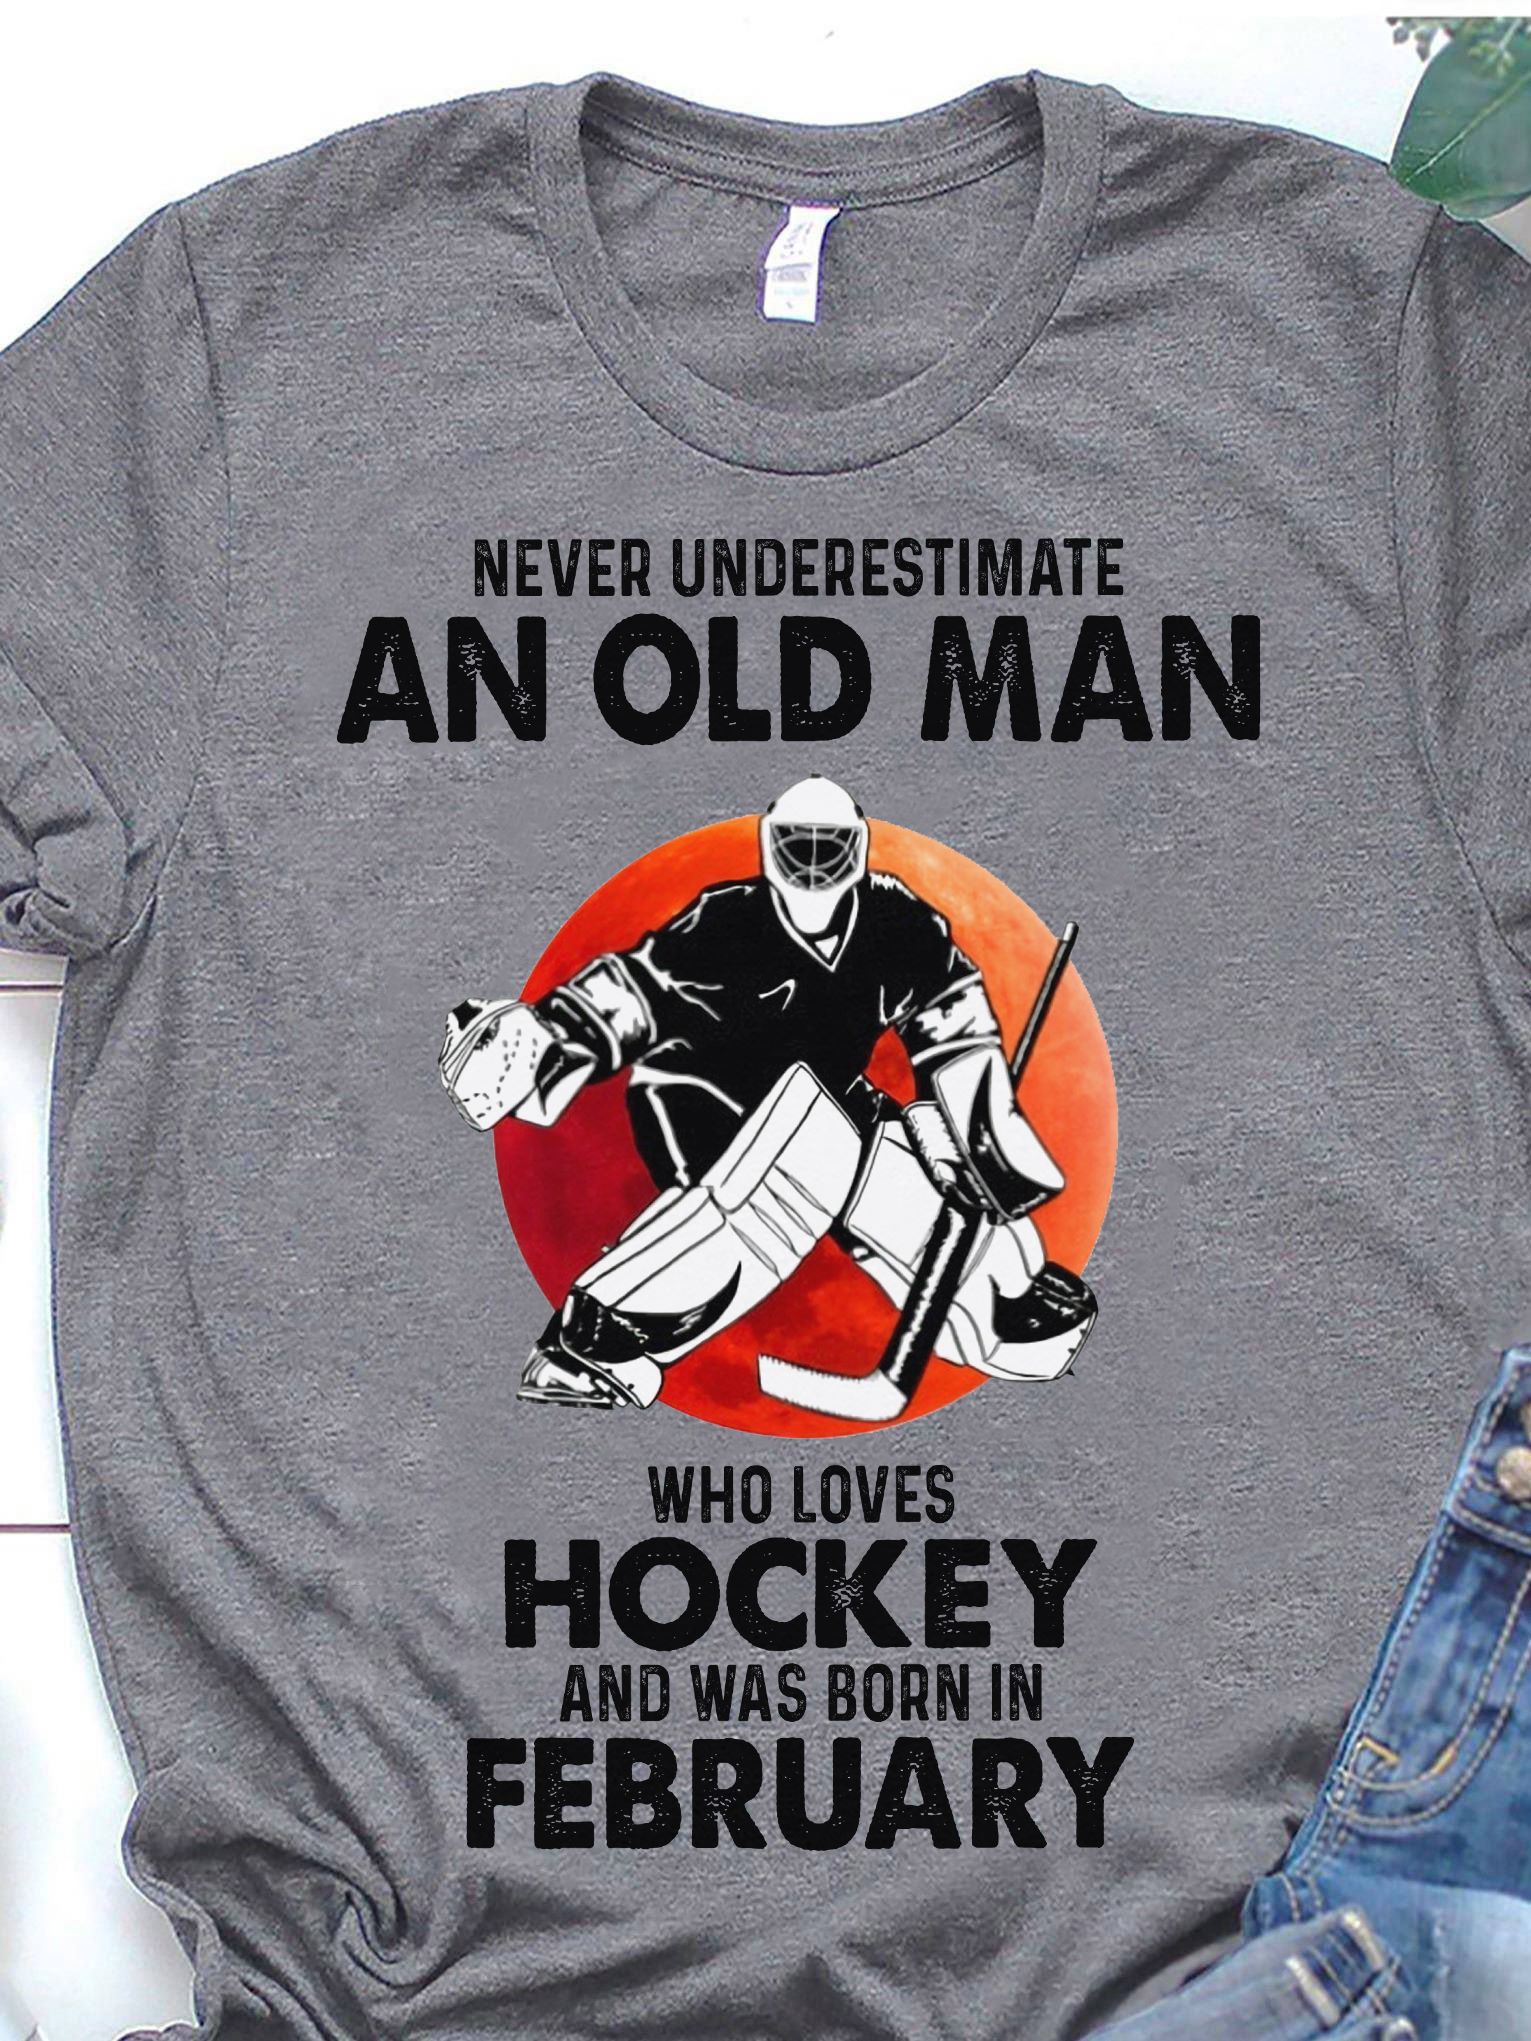 Never underestimate an old man who loves hockey and was born in February